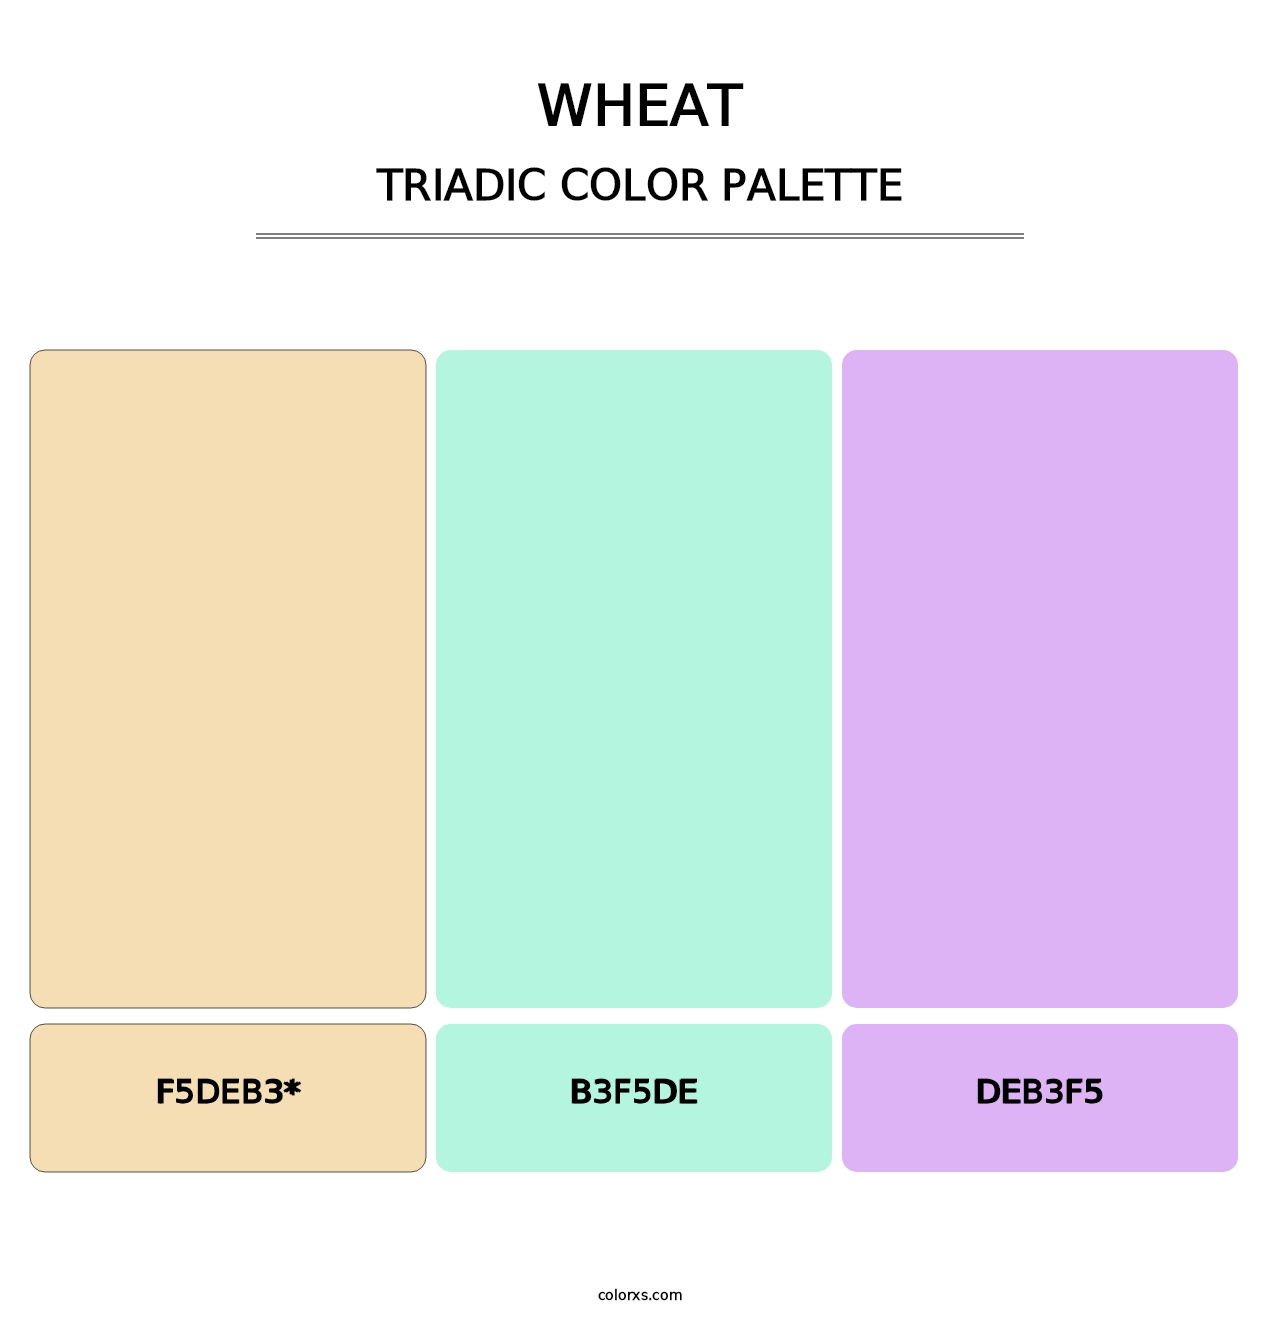 Wheat - Triadic Color Palette